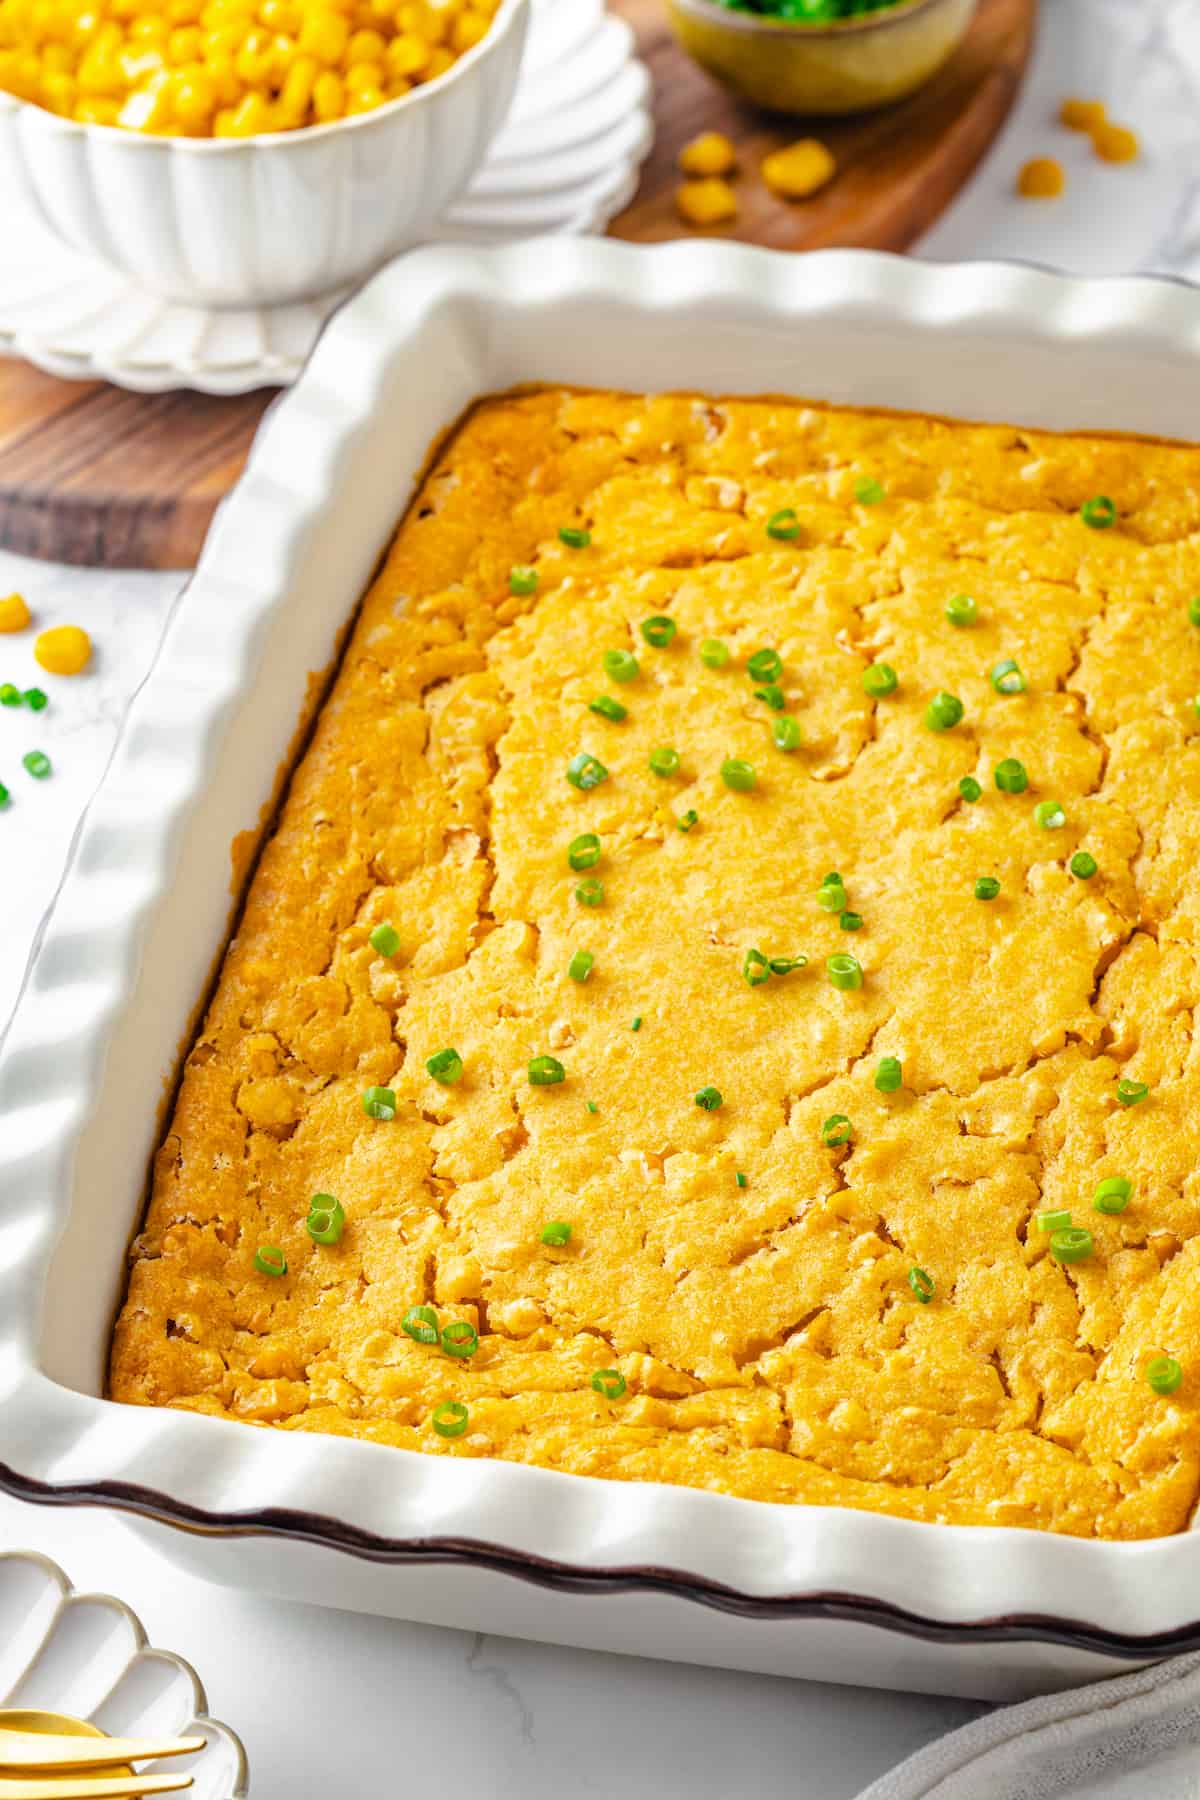 Cornbread pudding in white casserole dish with green onions scattered over top